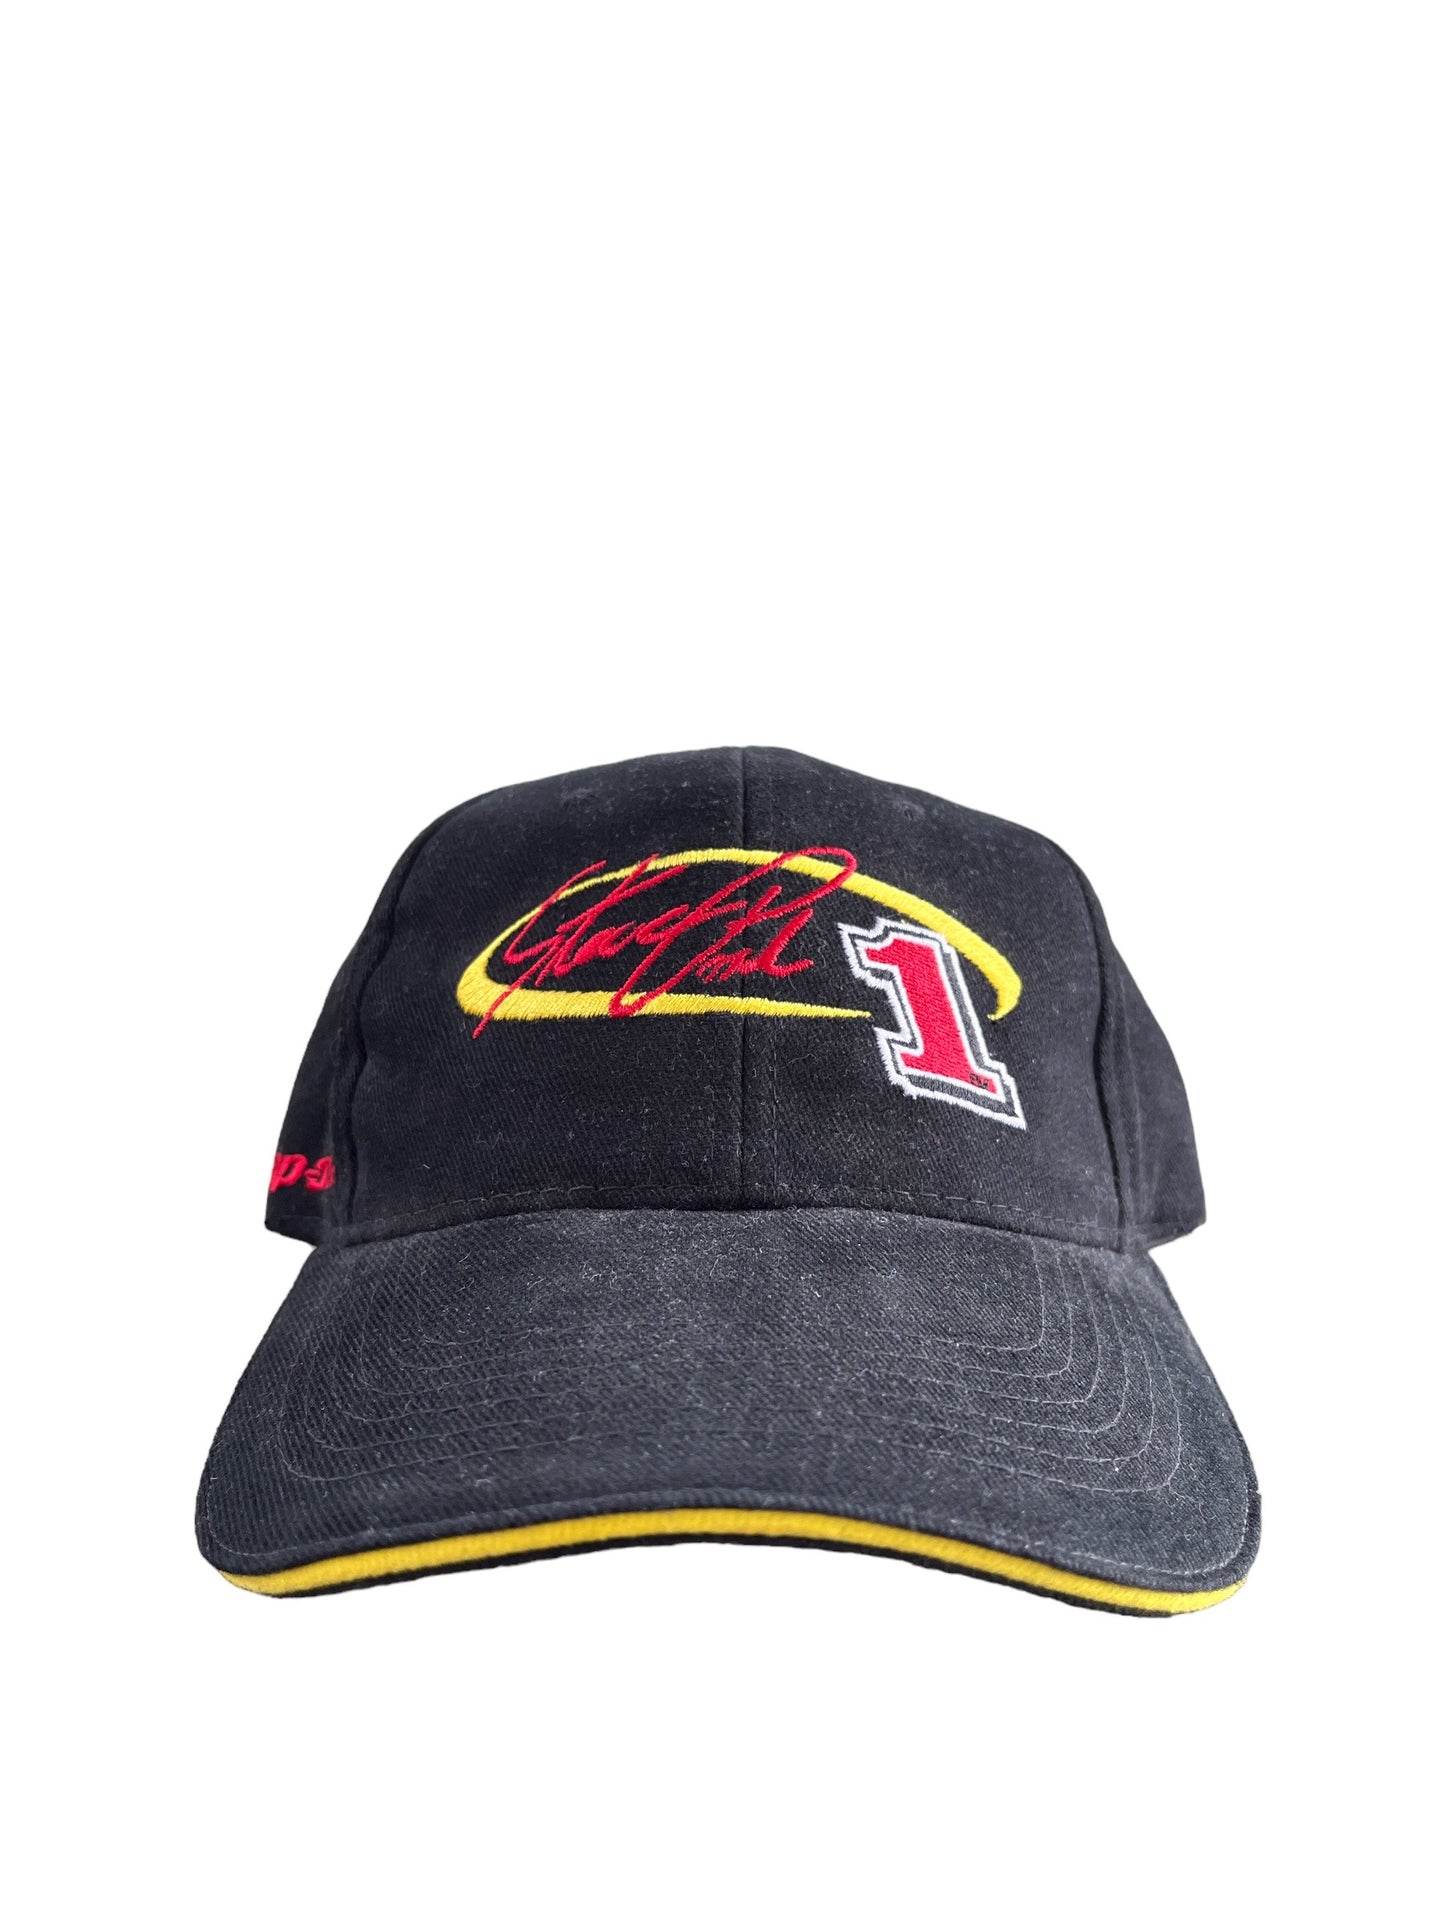 Vintage Chase Authentics Snap On Hat